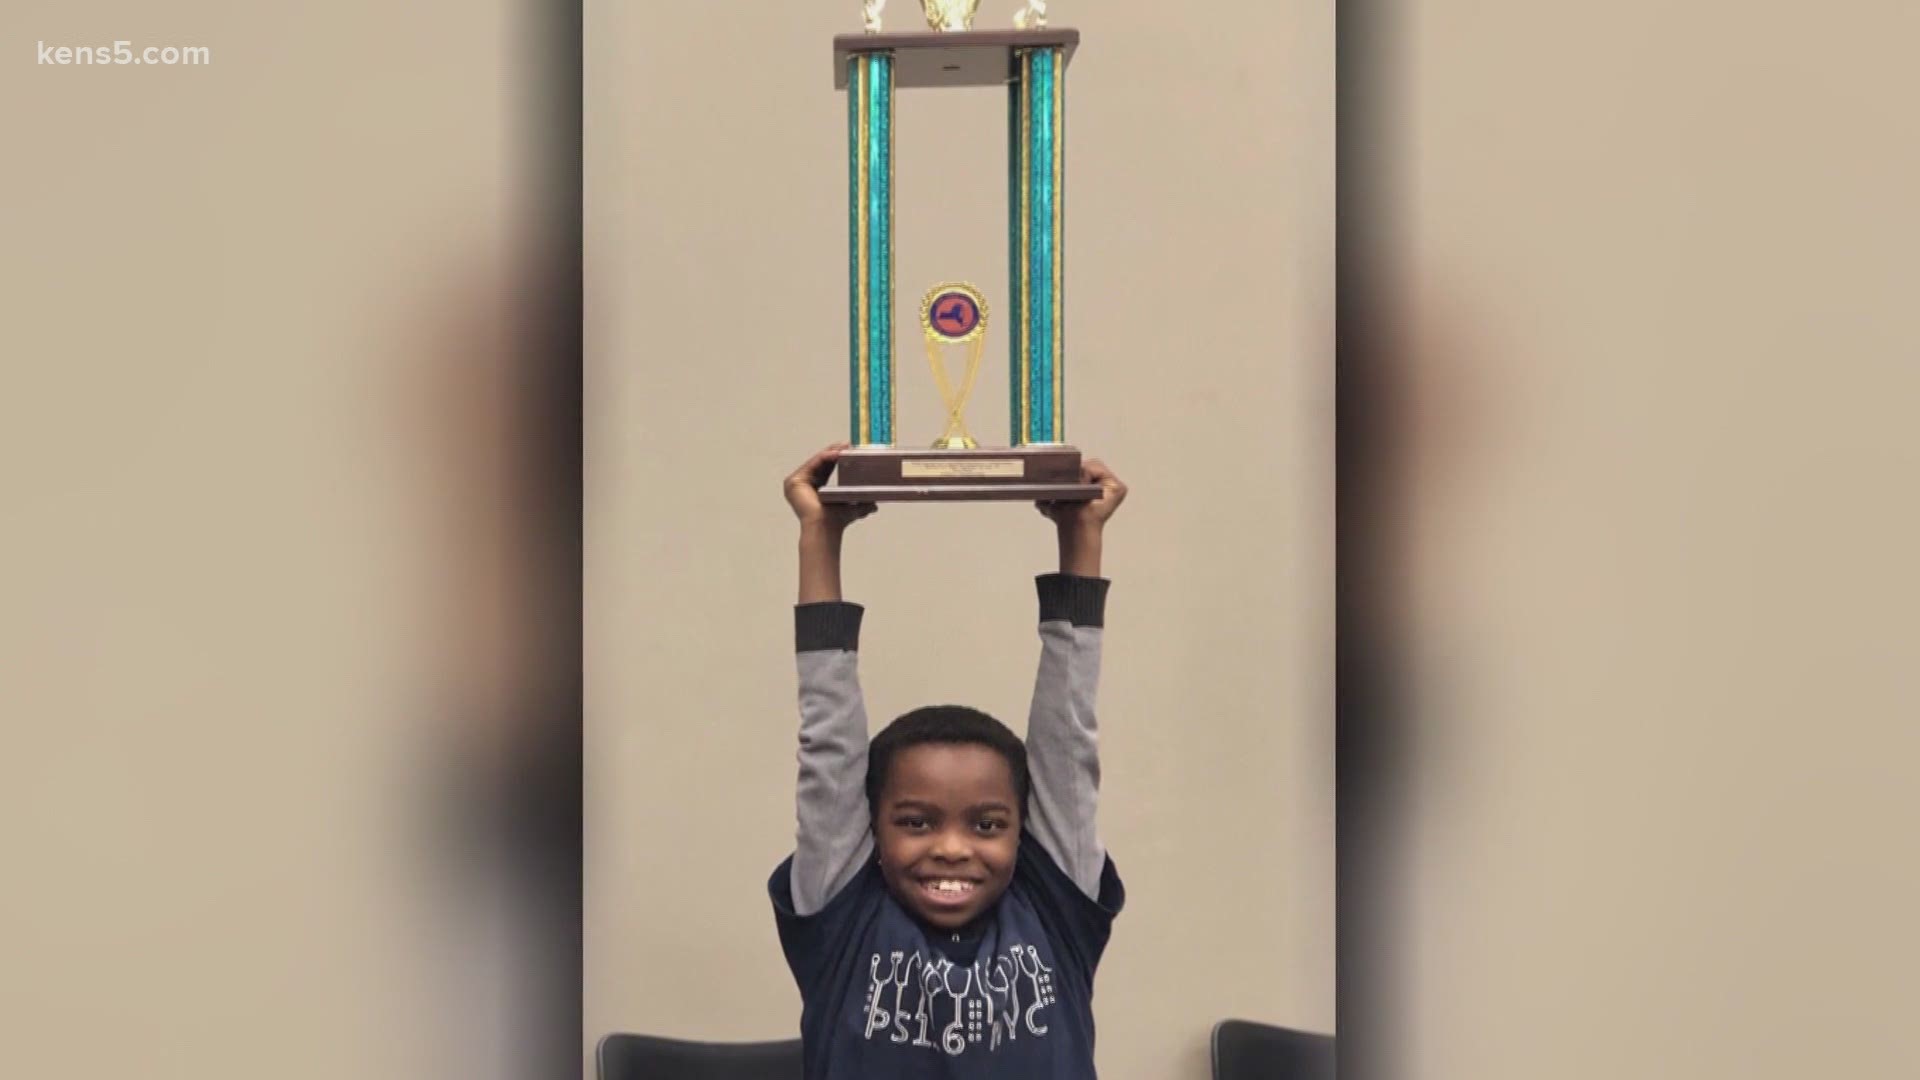 Meet the 9-year-old who learned to play chess while living in a homeless shelter. He's now on a quest to become the world's youngest grandmaster.